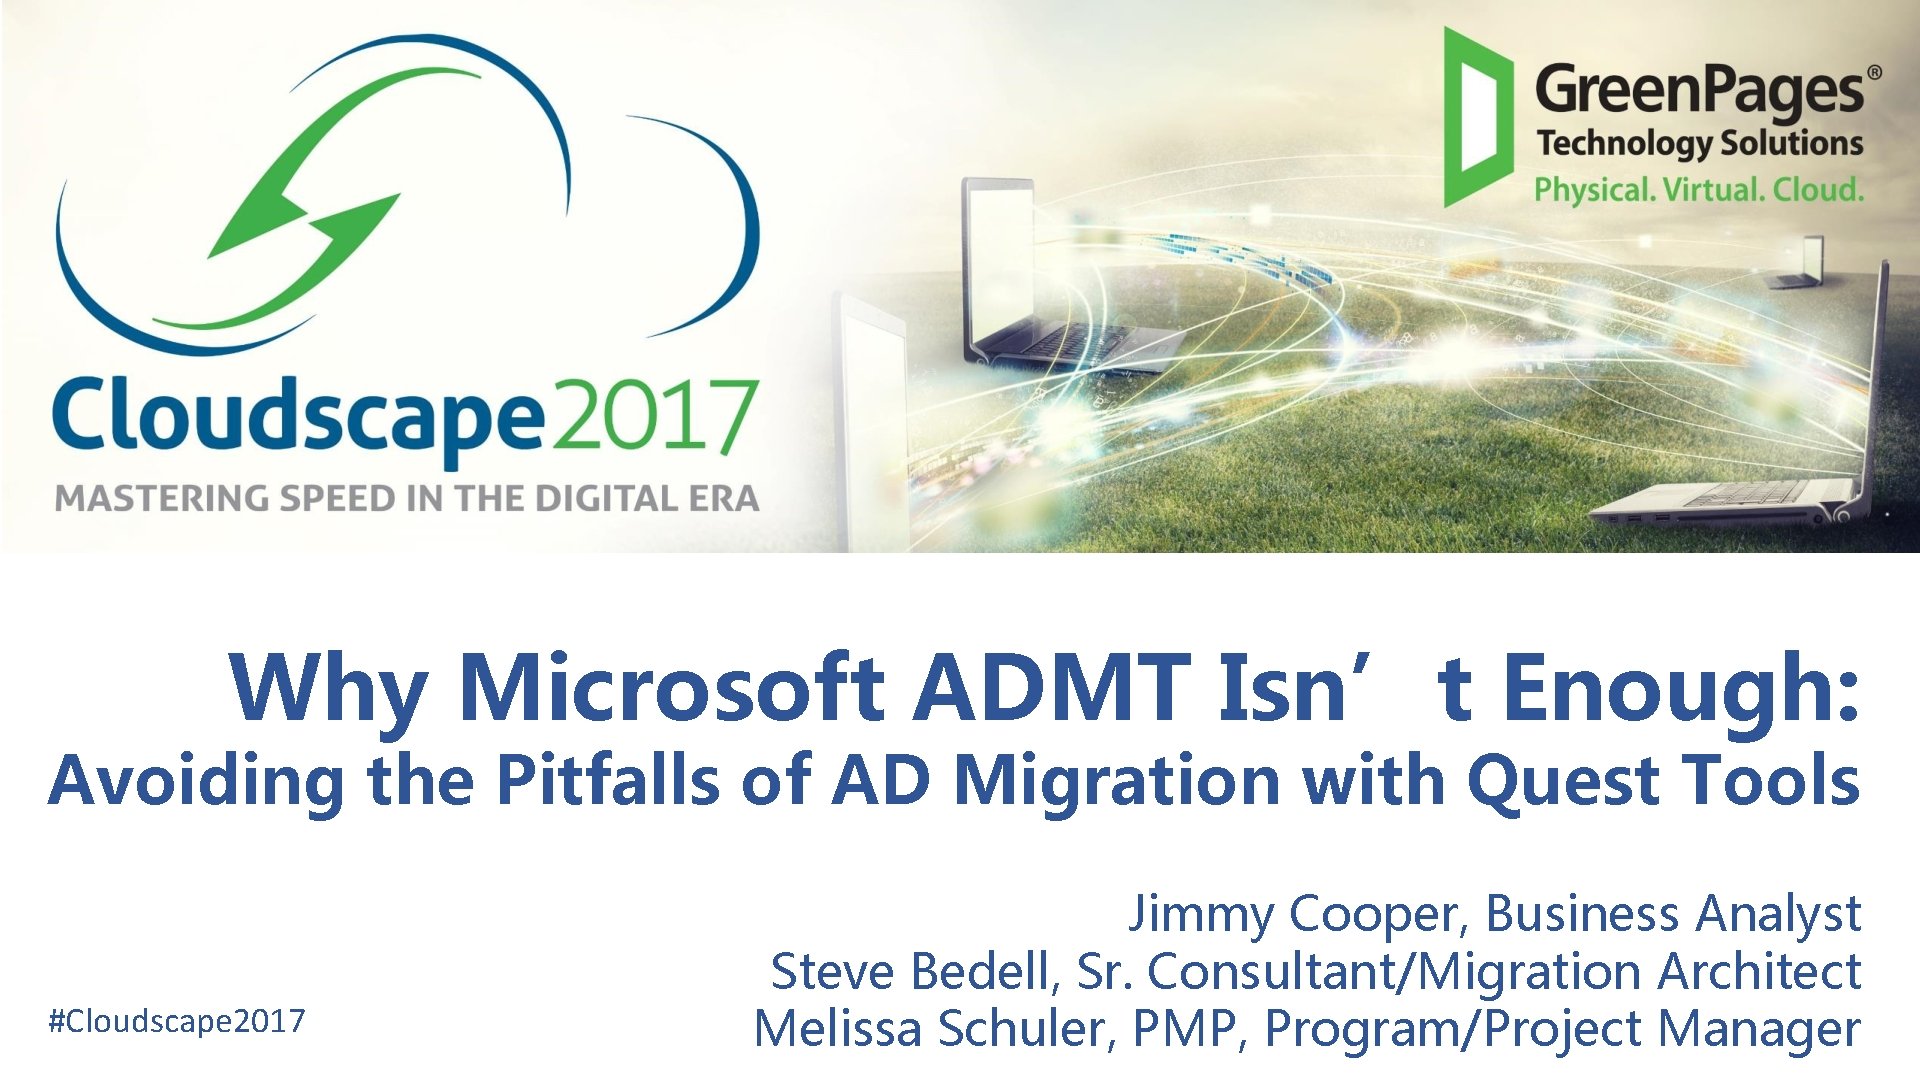 Why Microsoft ADMT Isn’t Enough: Avoiding the Pitfalls of AD Migration with Quest Tools